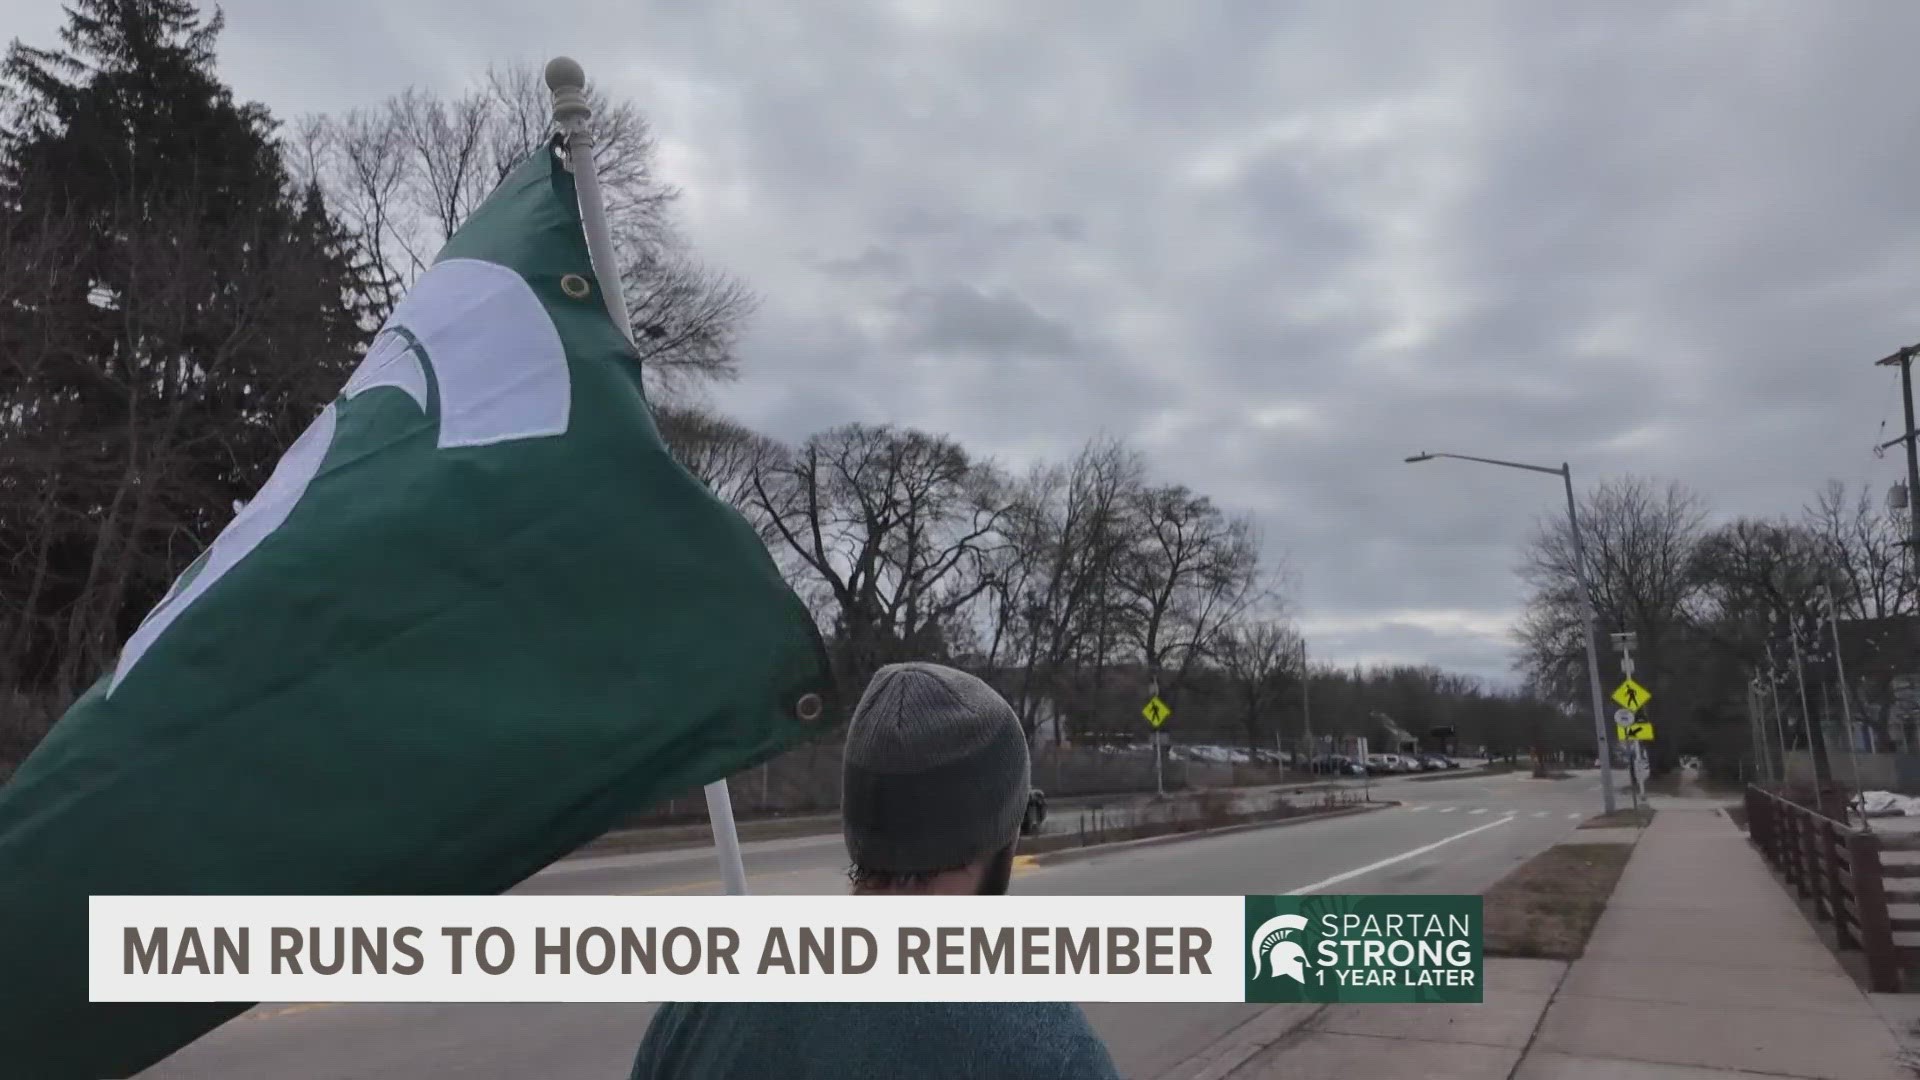 Zachary Baker usually runs with the U.S. flag to honor veterans, Tuesday he instead ran with the Spartan flag 1 year after the MSU shooting.